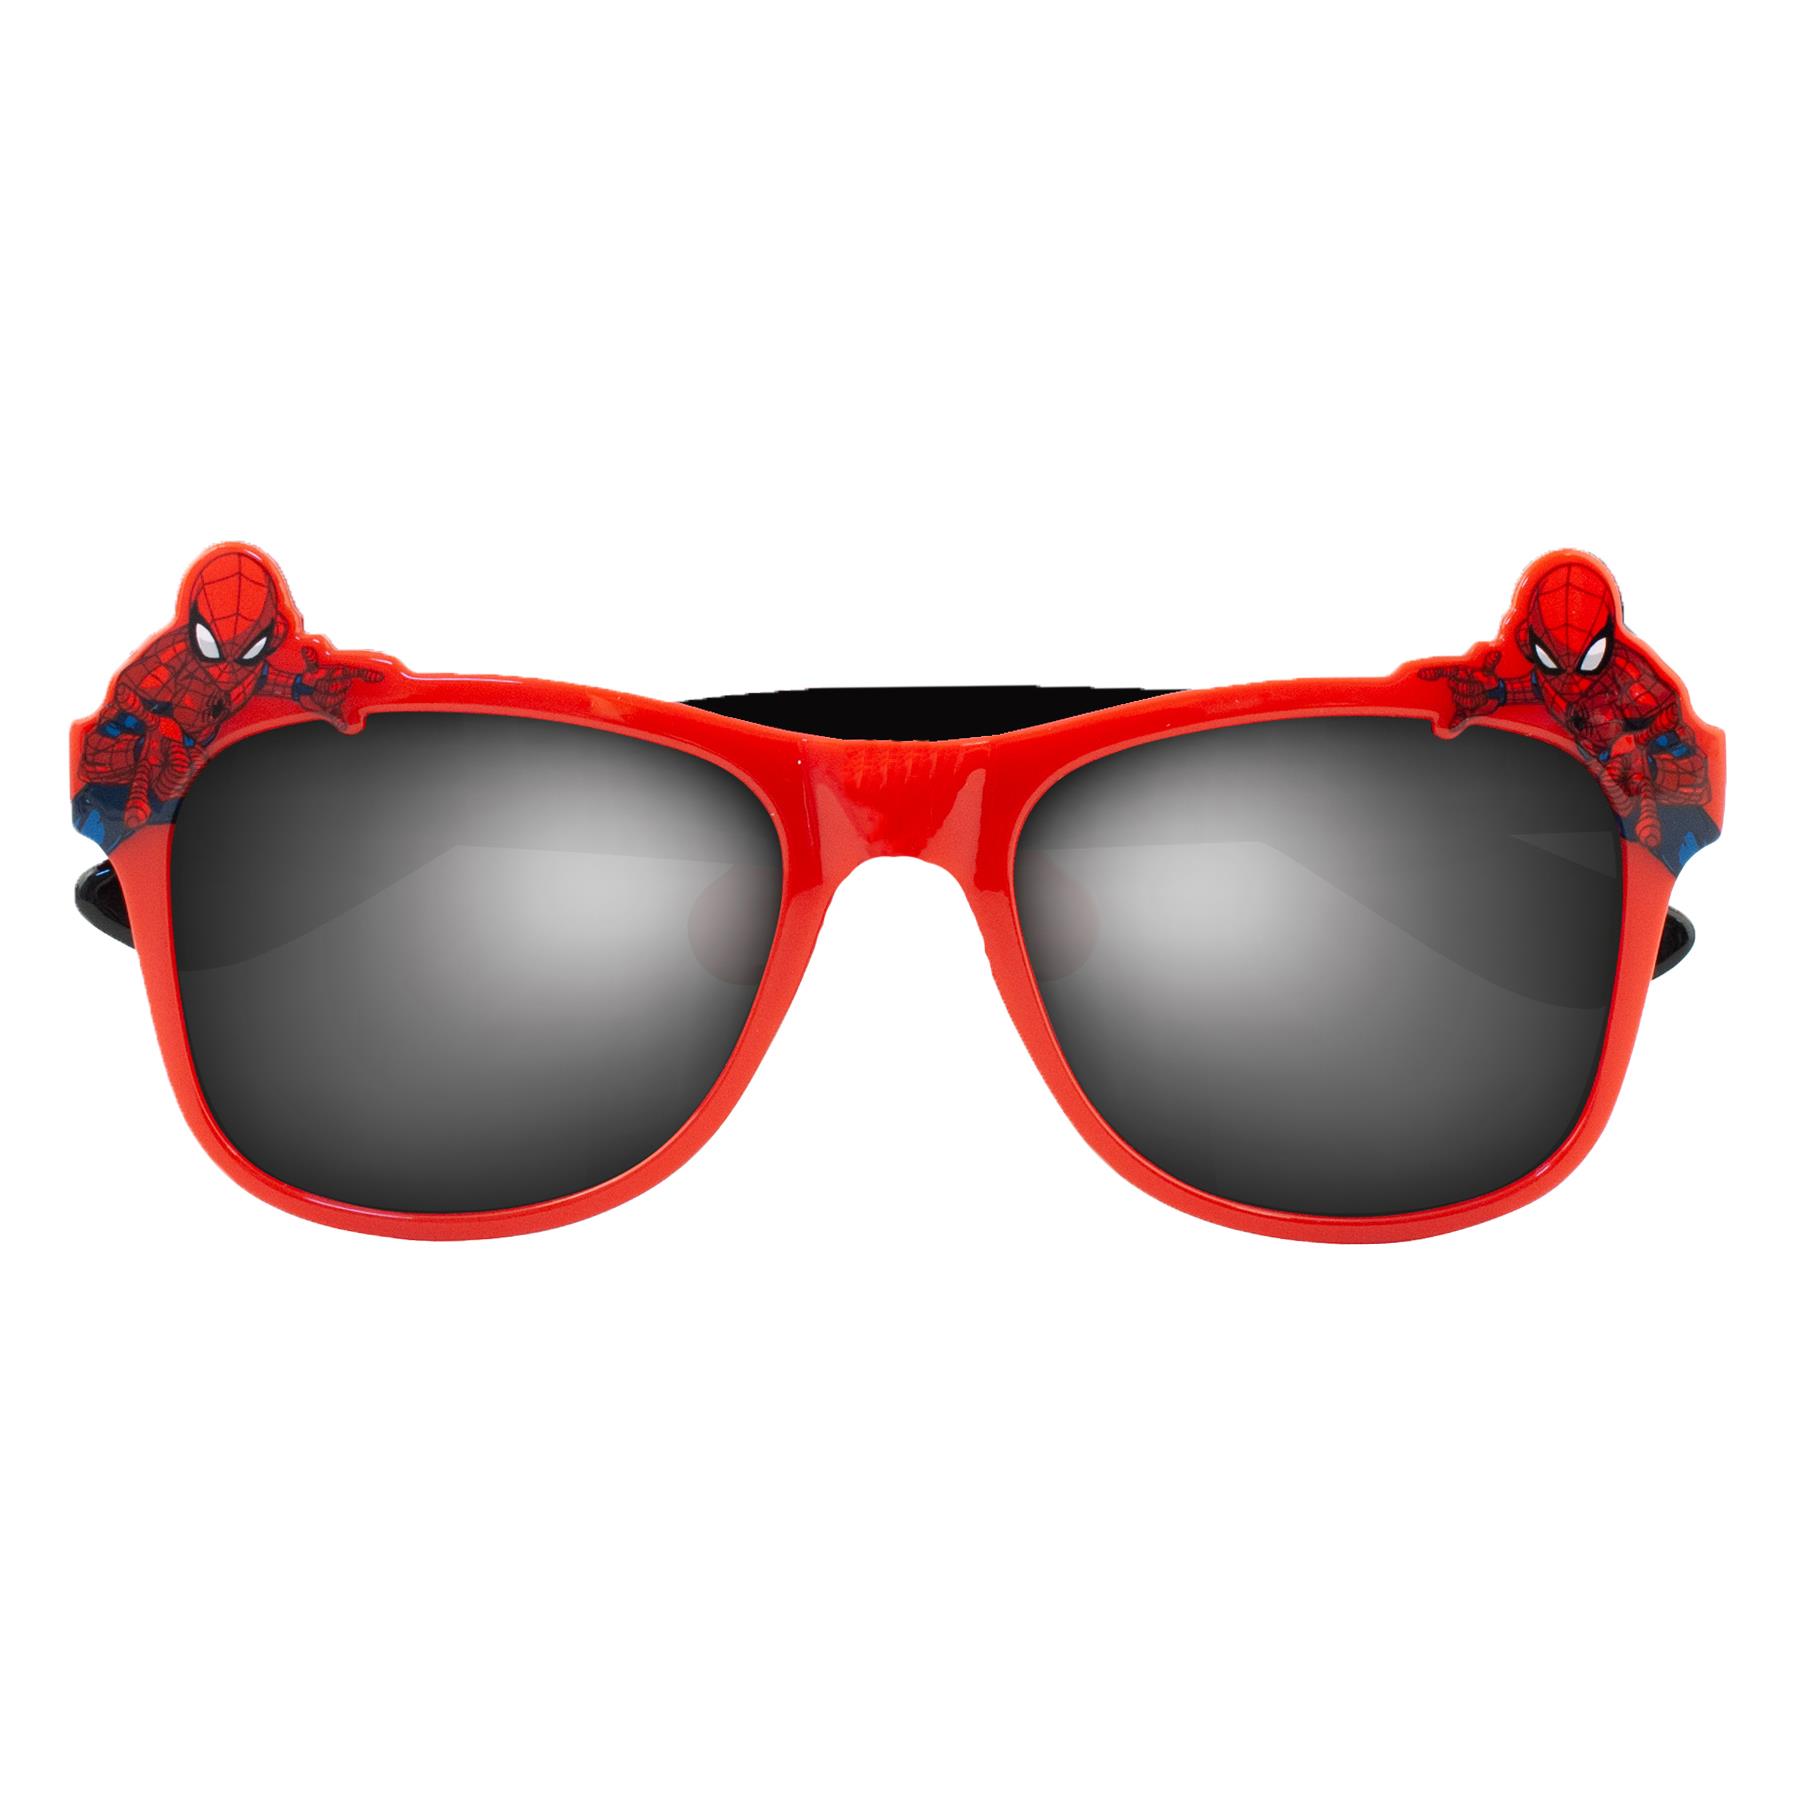 Superheroes Children's Sunglasses UV protection for Holiday - Marvel Spiderman SP21